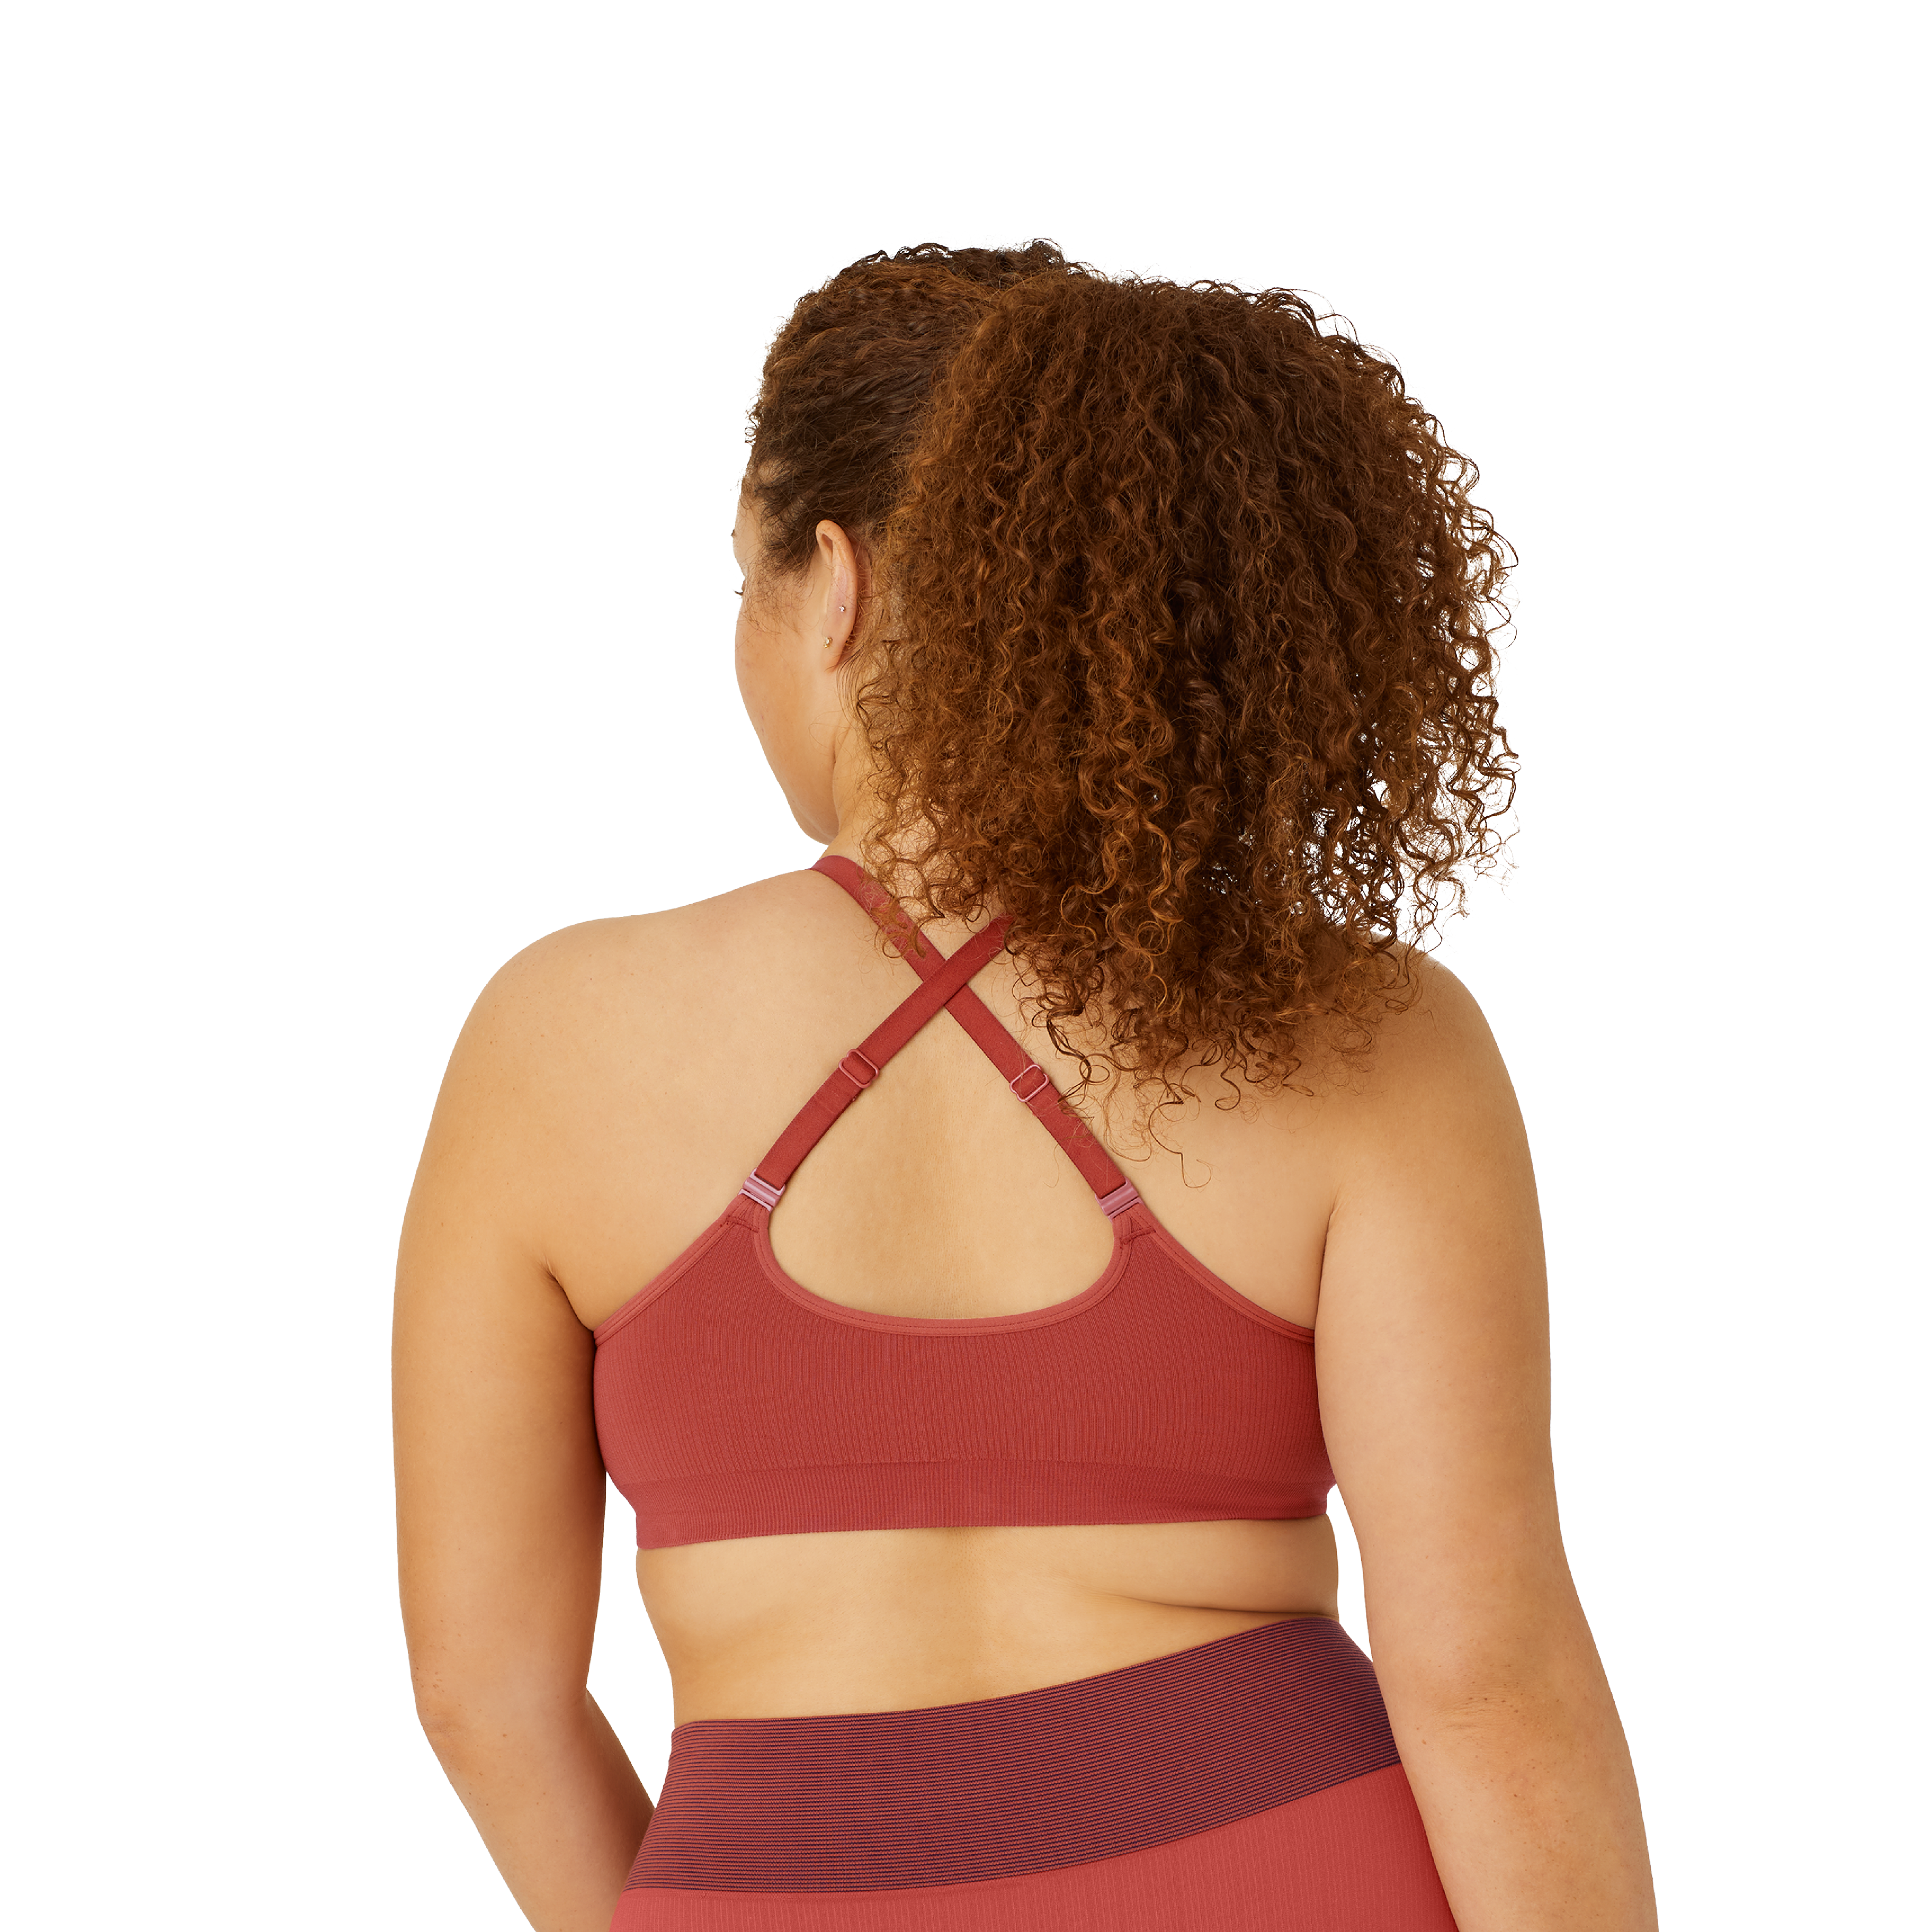 Bombshell sportswear NEW Sports Bra Medium Seamless Snap Button Ribbed Red  NWOT - $50 - From Leigh